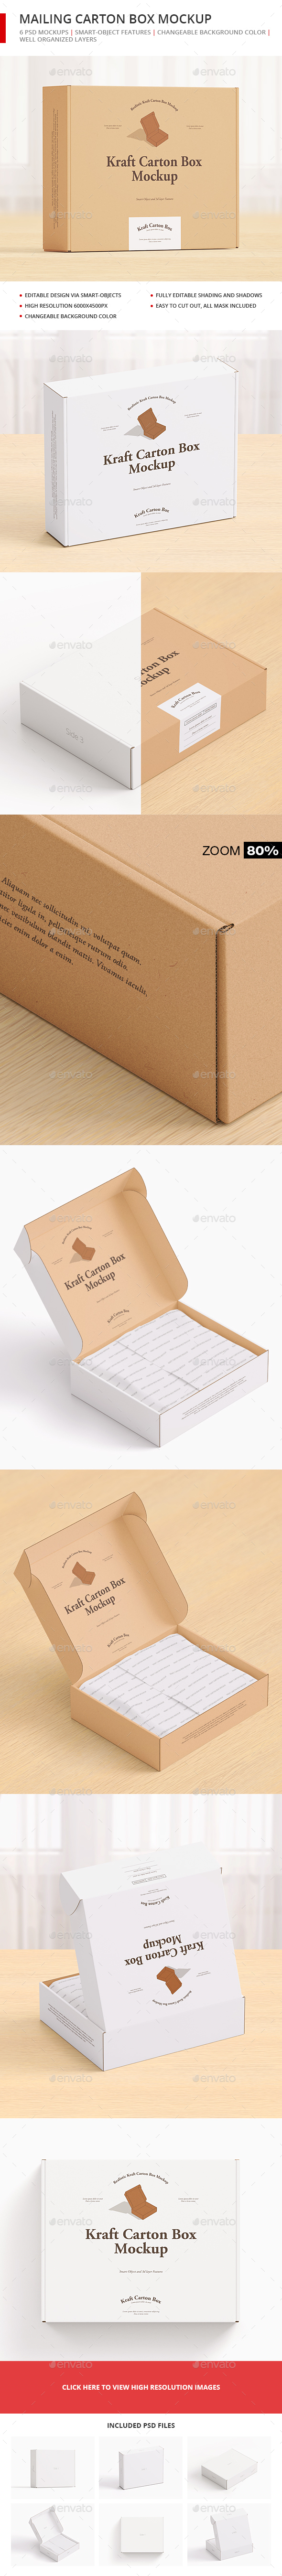 Download Packaging Mockups From Graphicriver